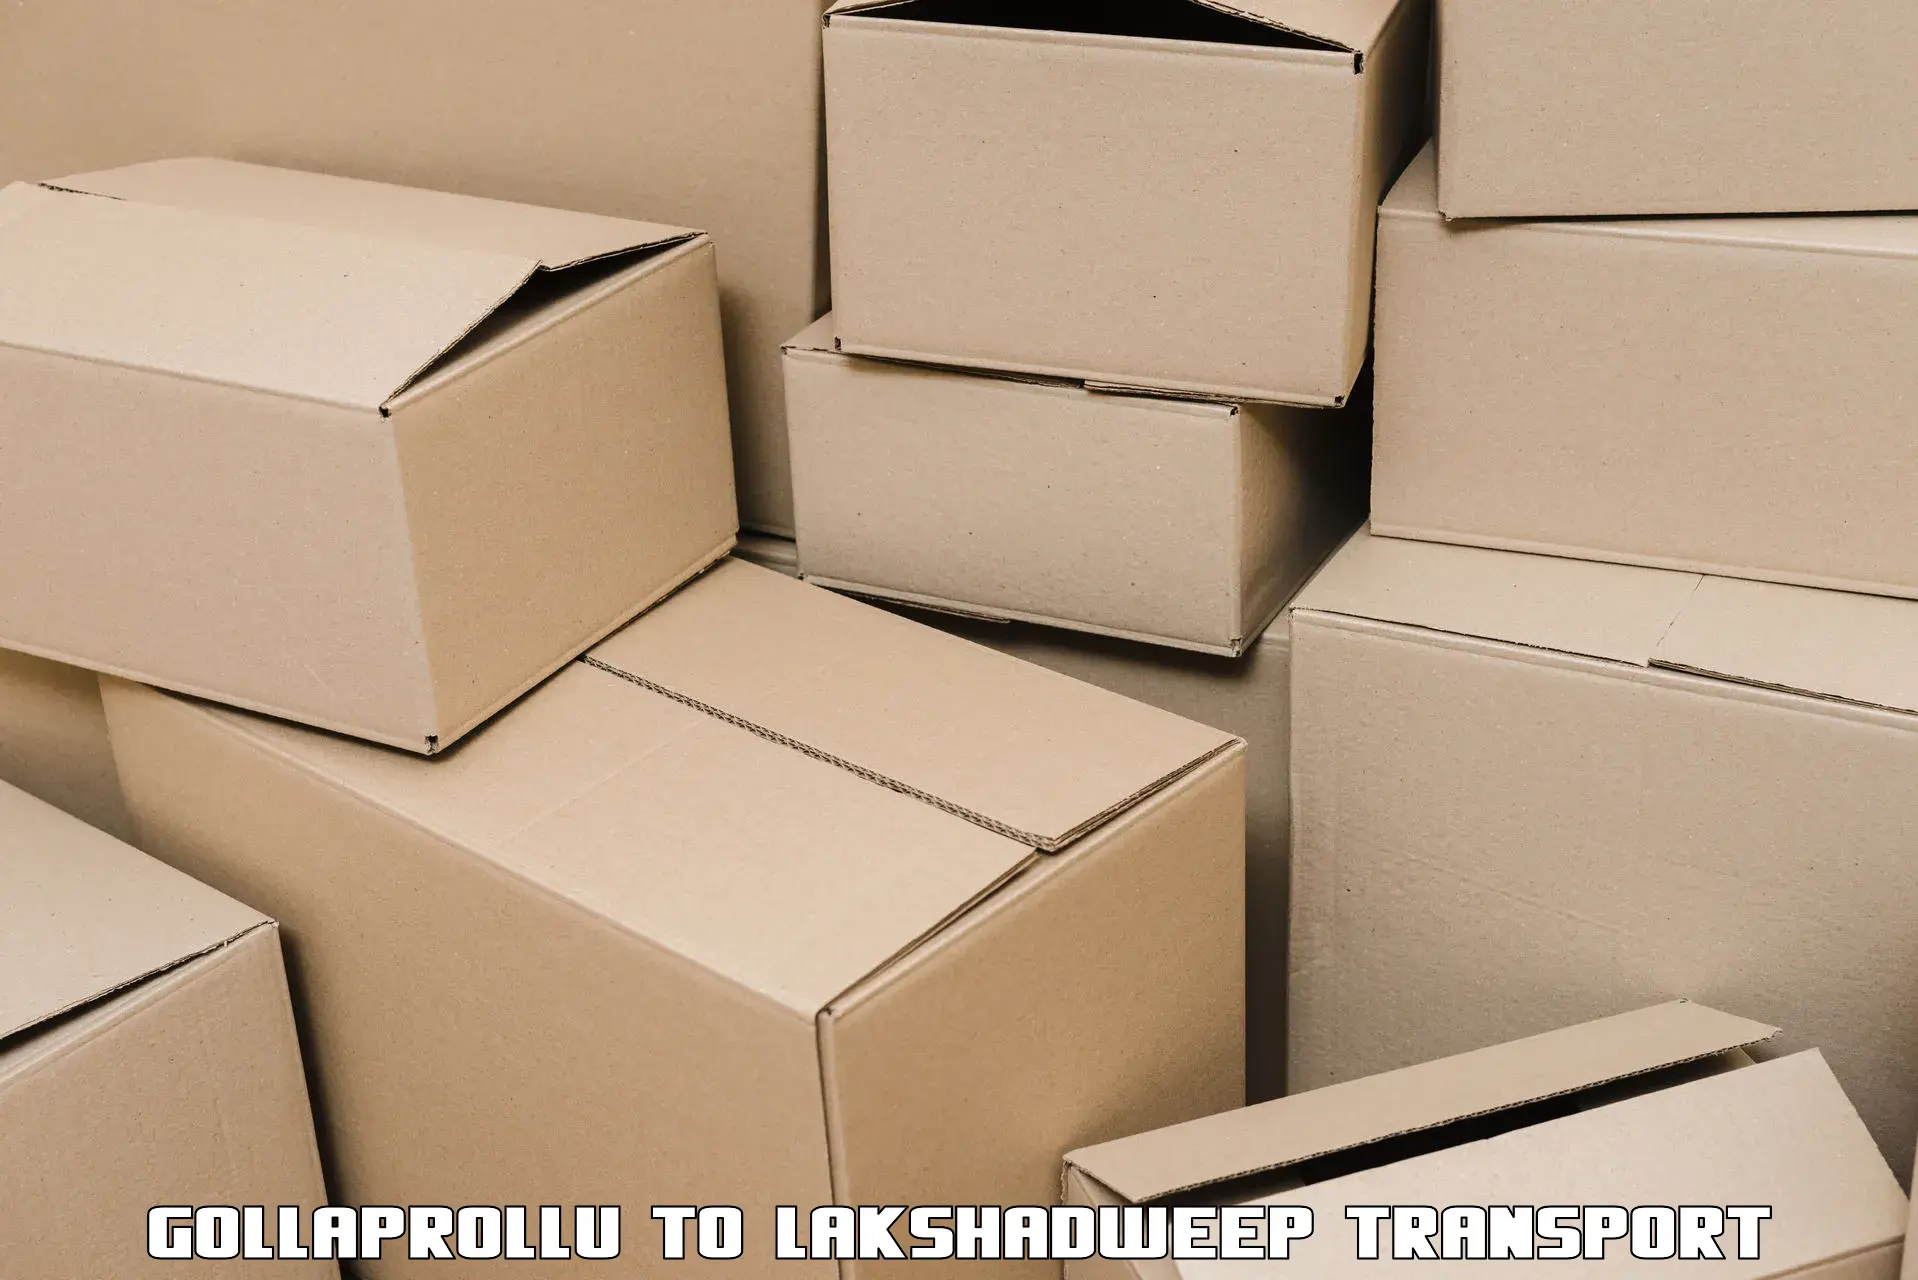 Truck transport companies in India Gollaprollu to Lakshadweep